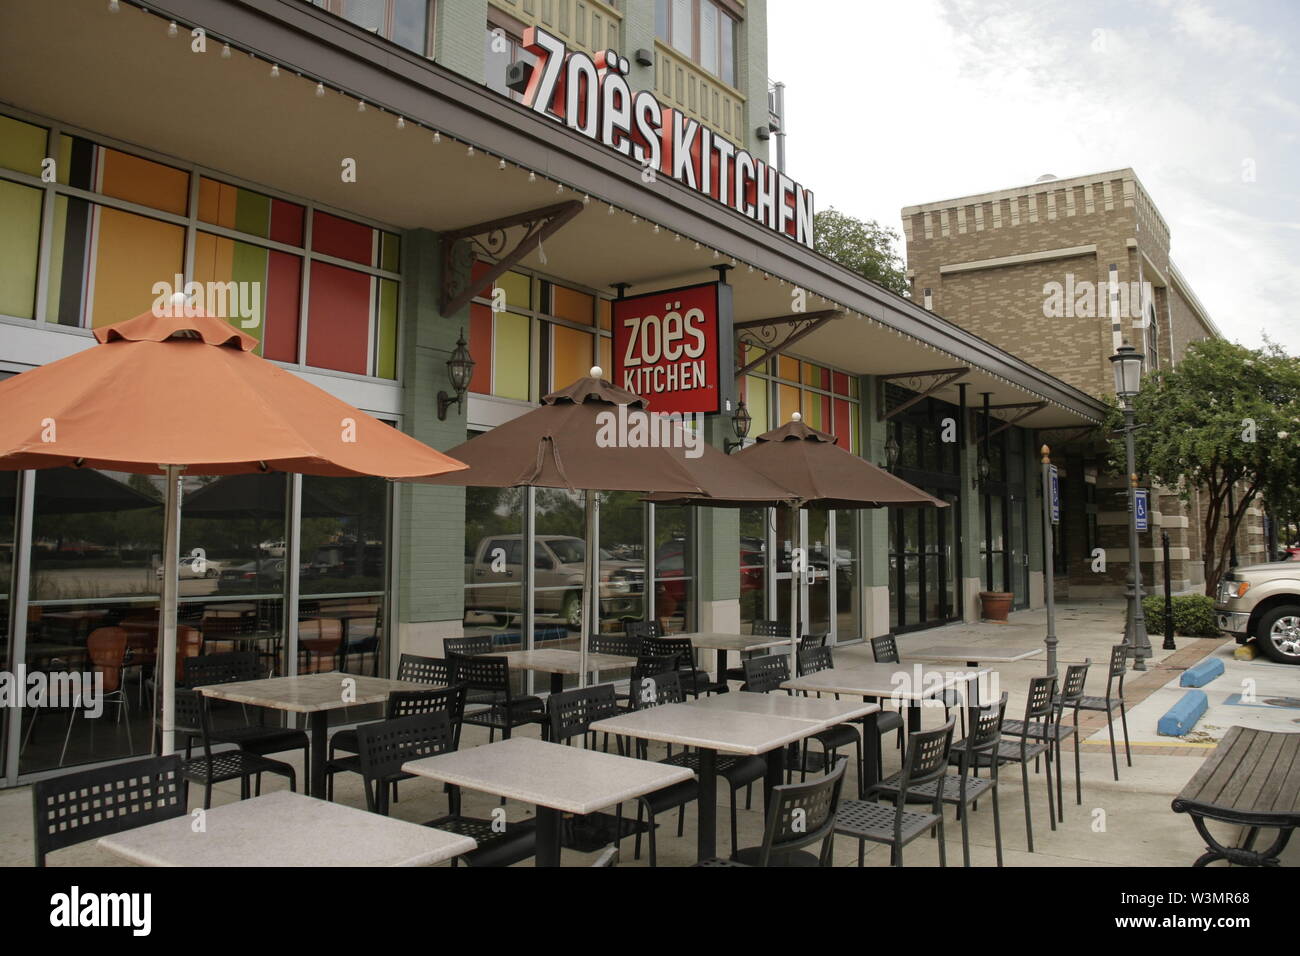 Zoes Kitchen Located At Perkins Rowe In Baton Rouge La W3MR68 